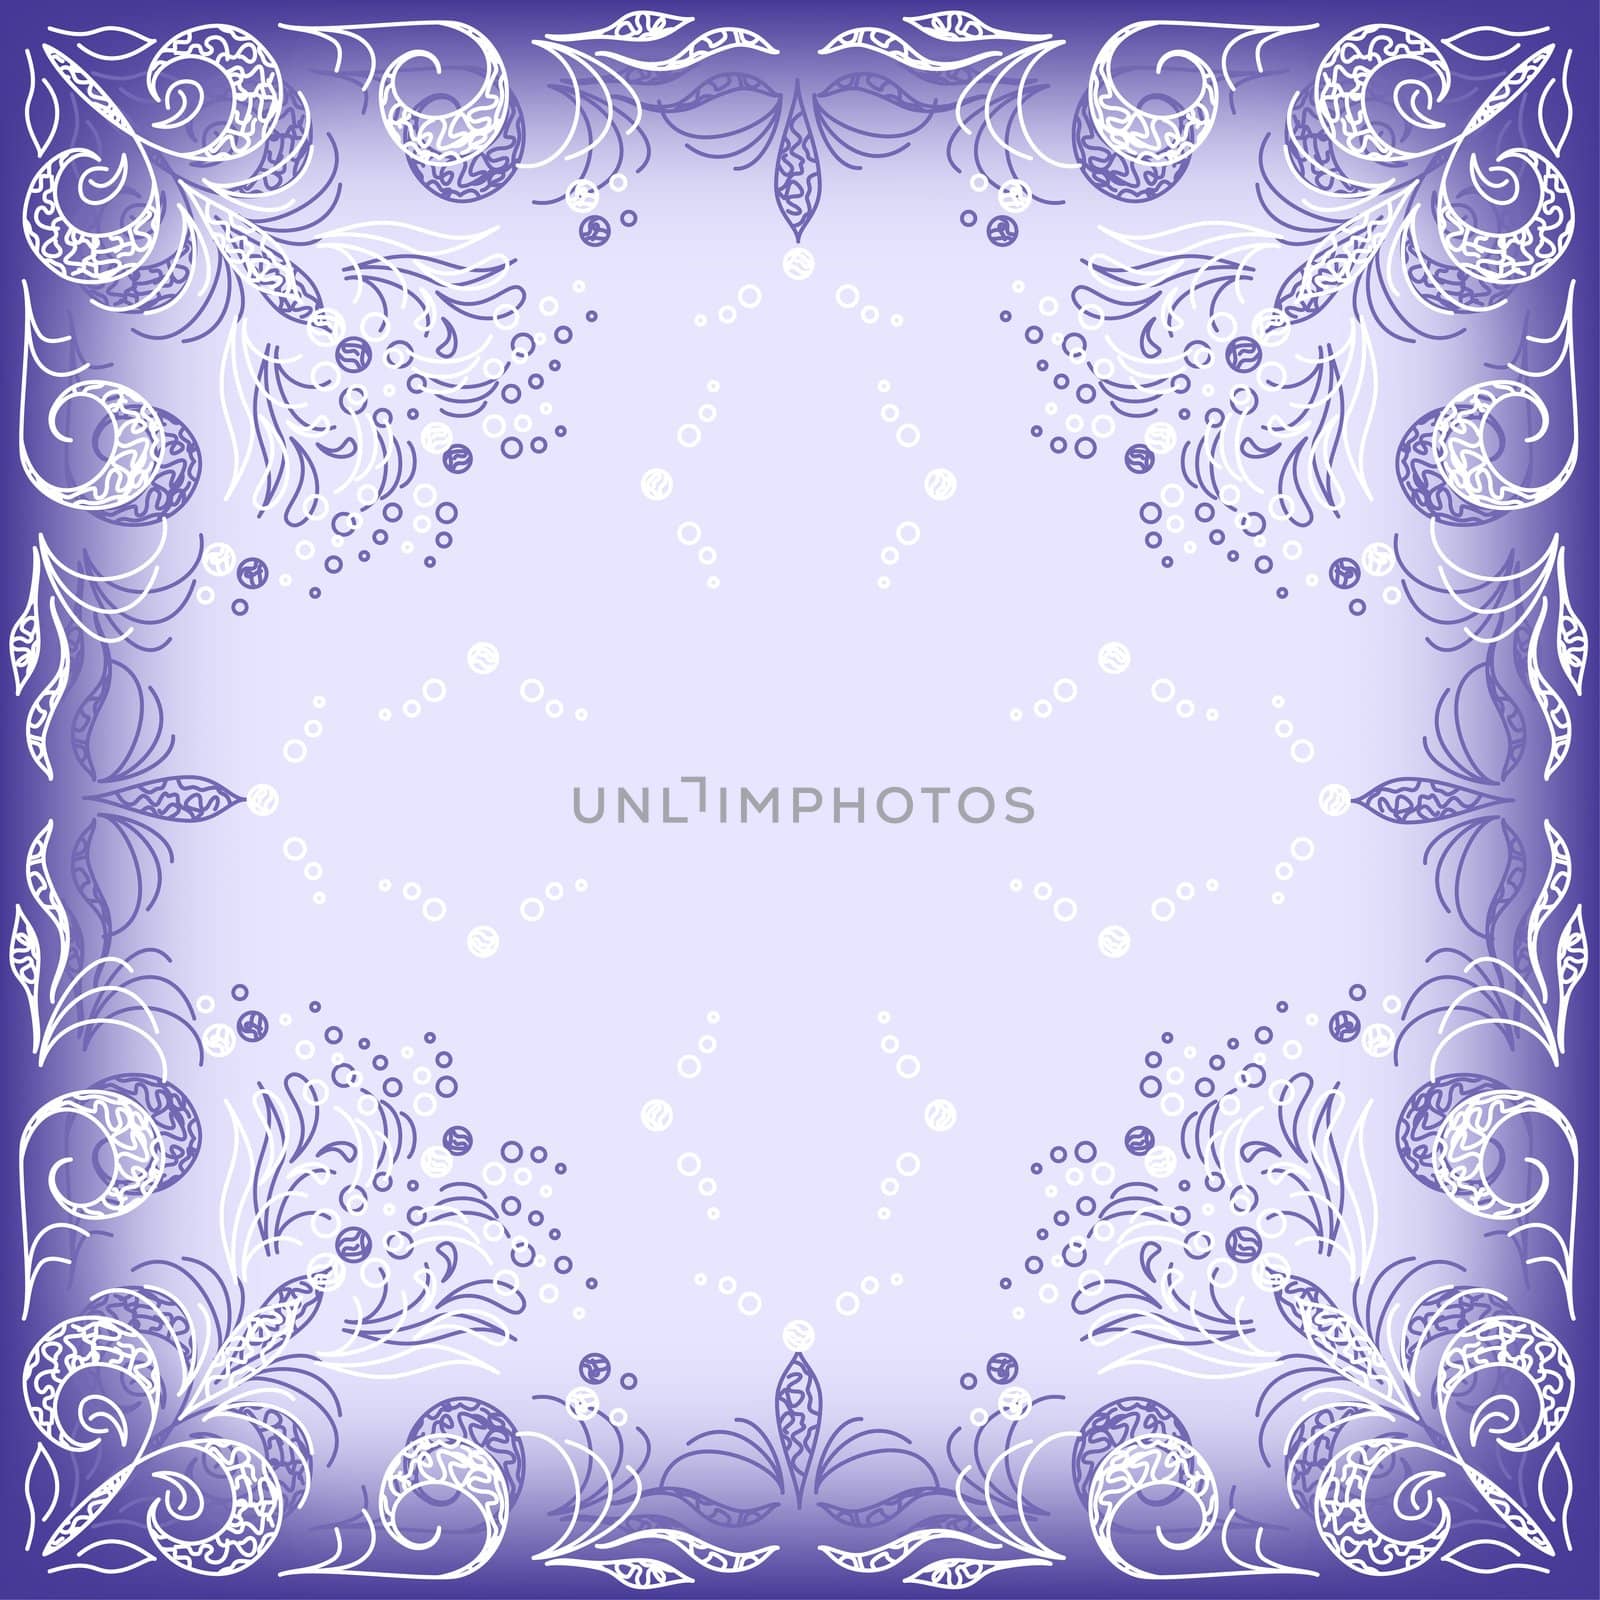 Abstract blue and white background with graphic floral pattern